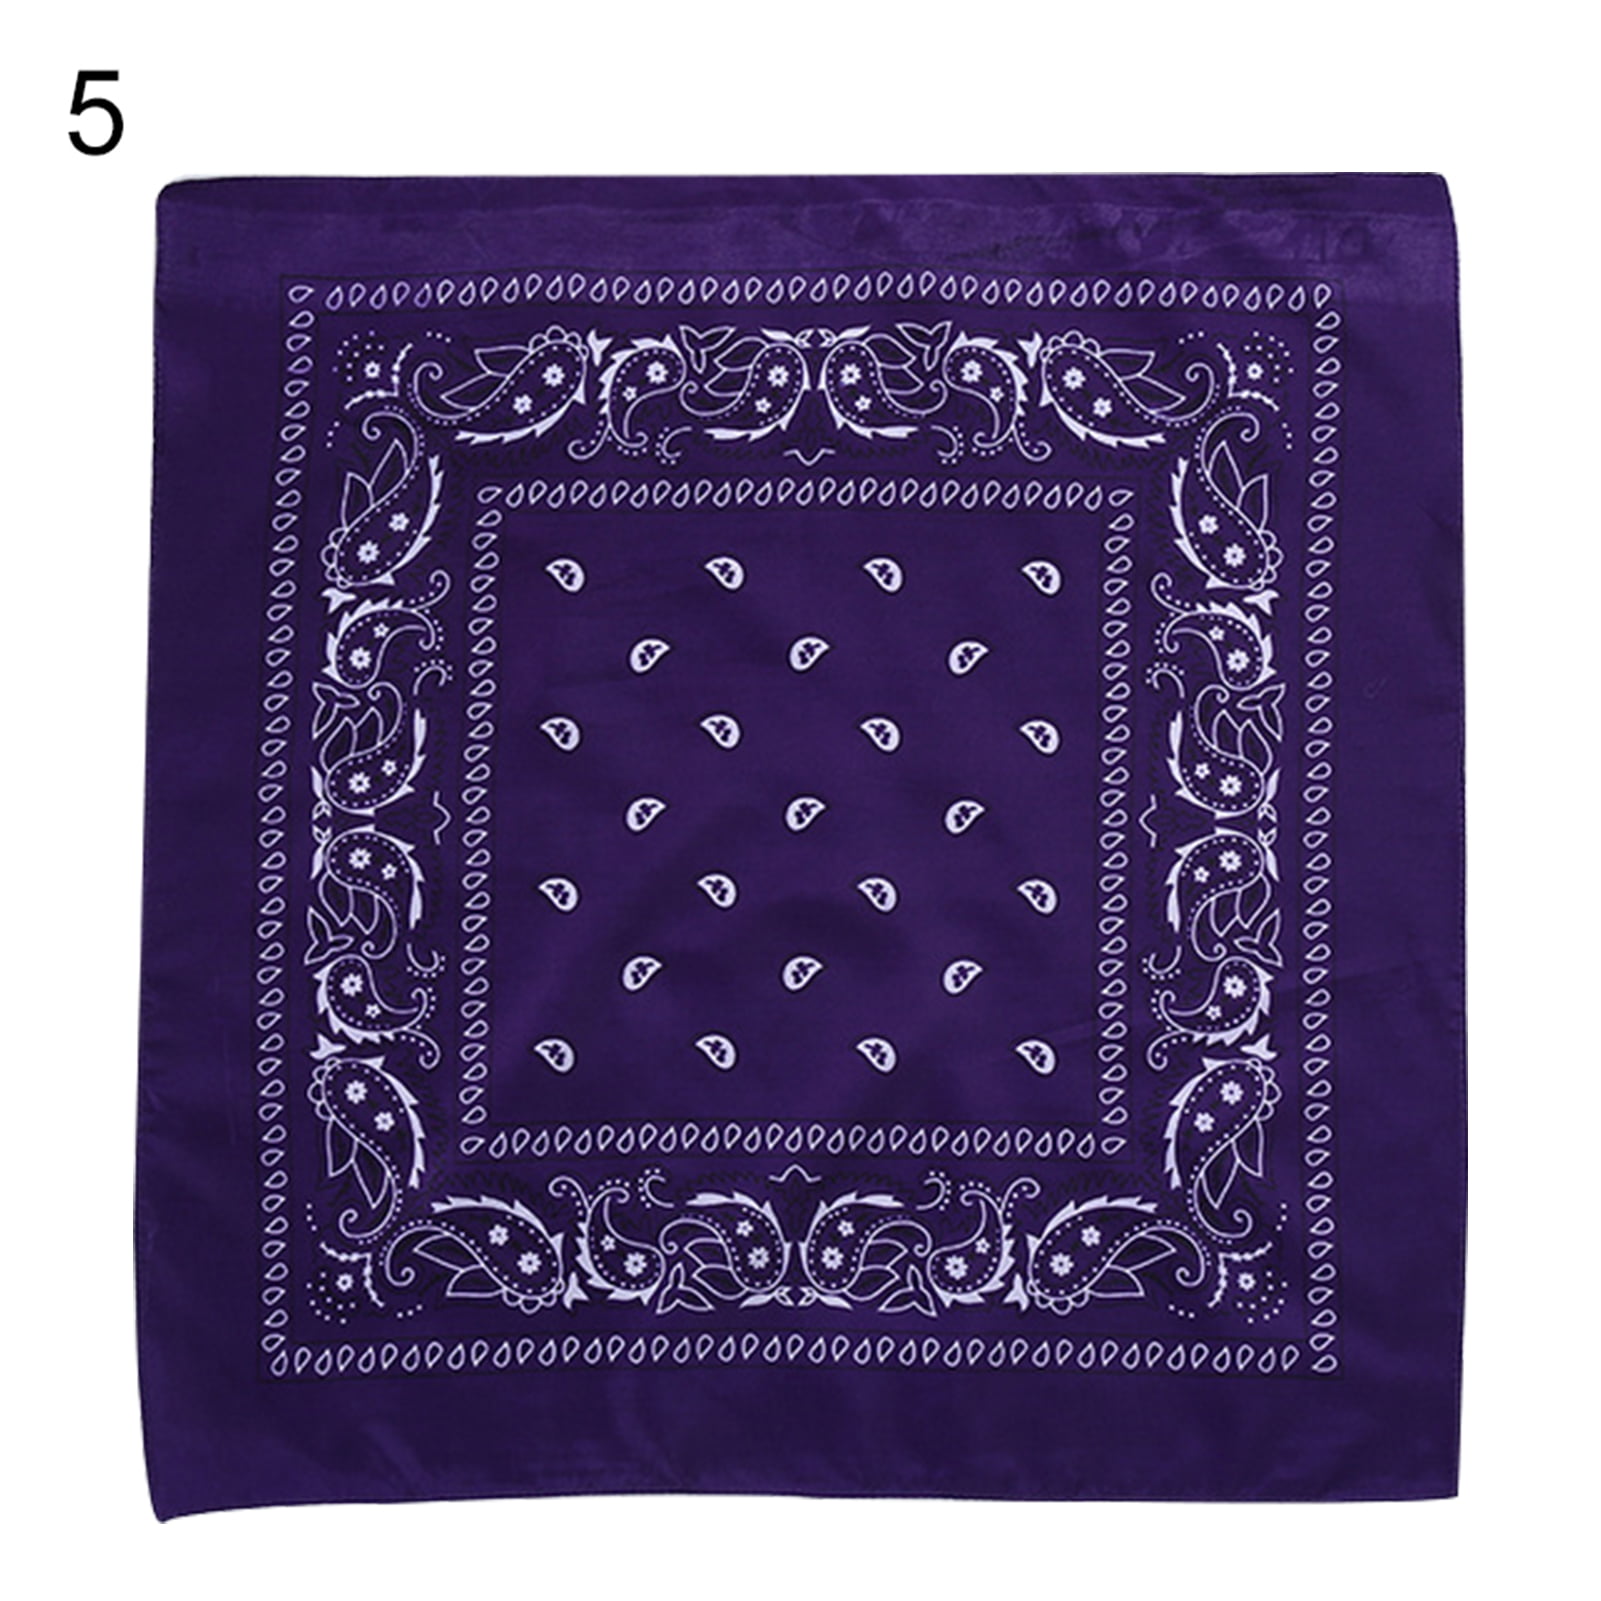 For Balaclavas, Women Cycling Cotton Bandana Dogs Paisley Scarf Handkerchief Ideal for and Men, DIY Headbands Cowboy & Square Scarf Suitable Hip-Hop for 100% Face Manunclaims Bandana